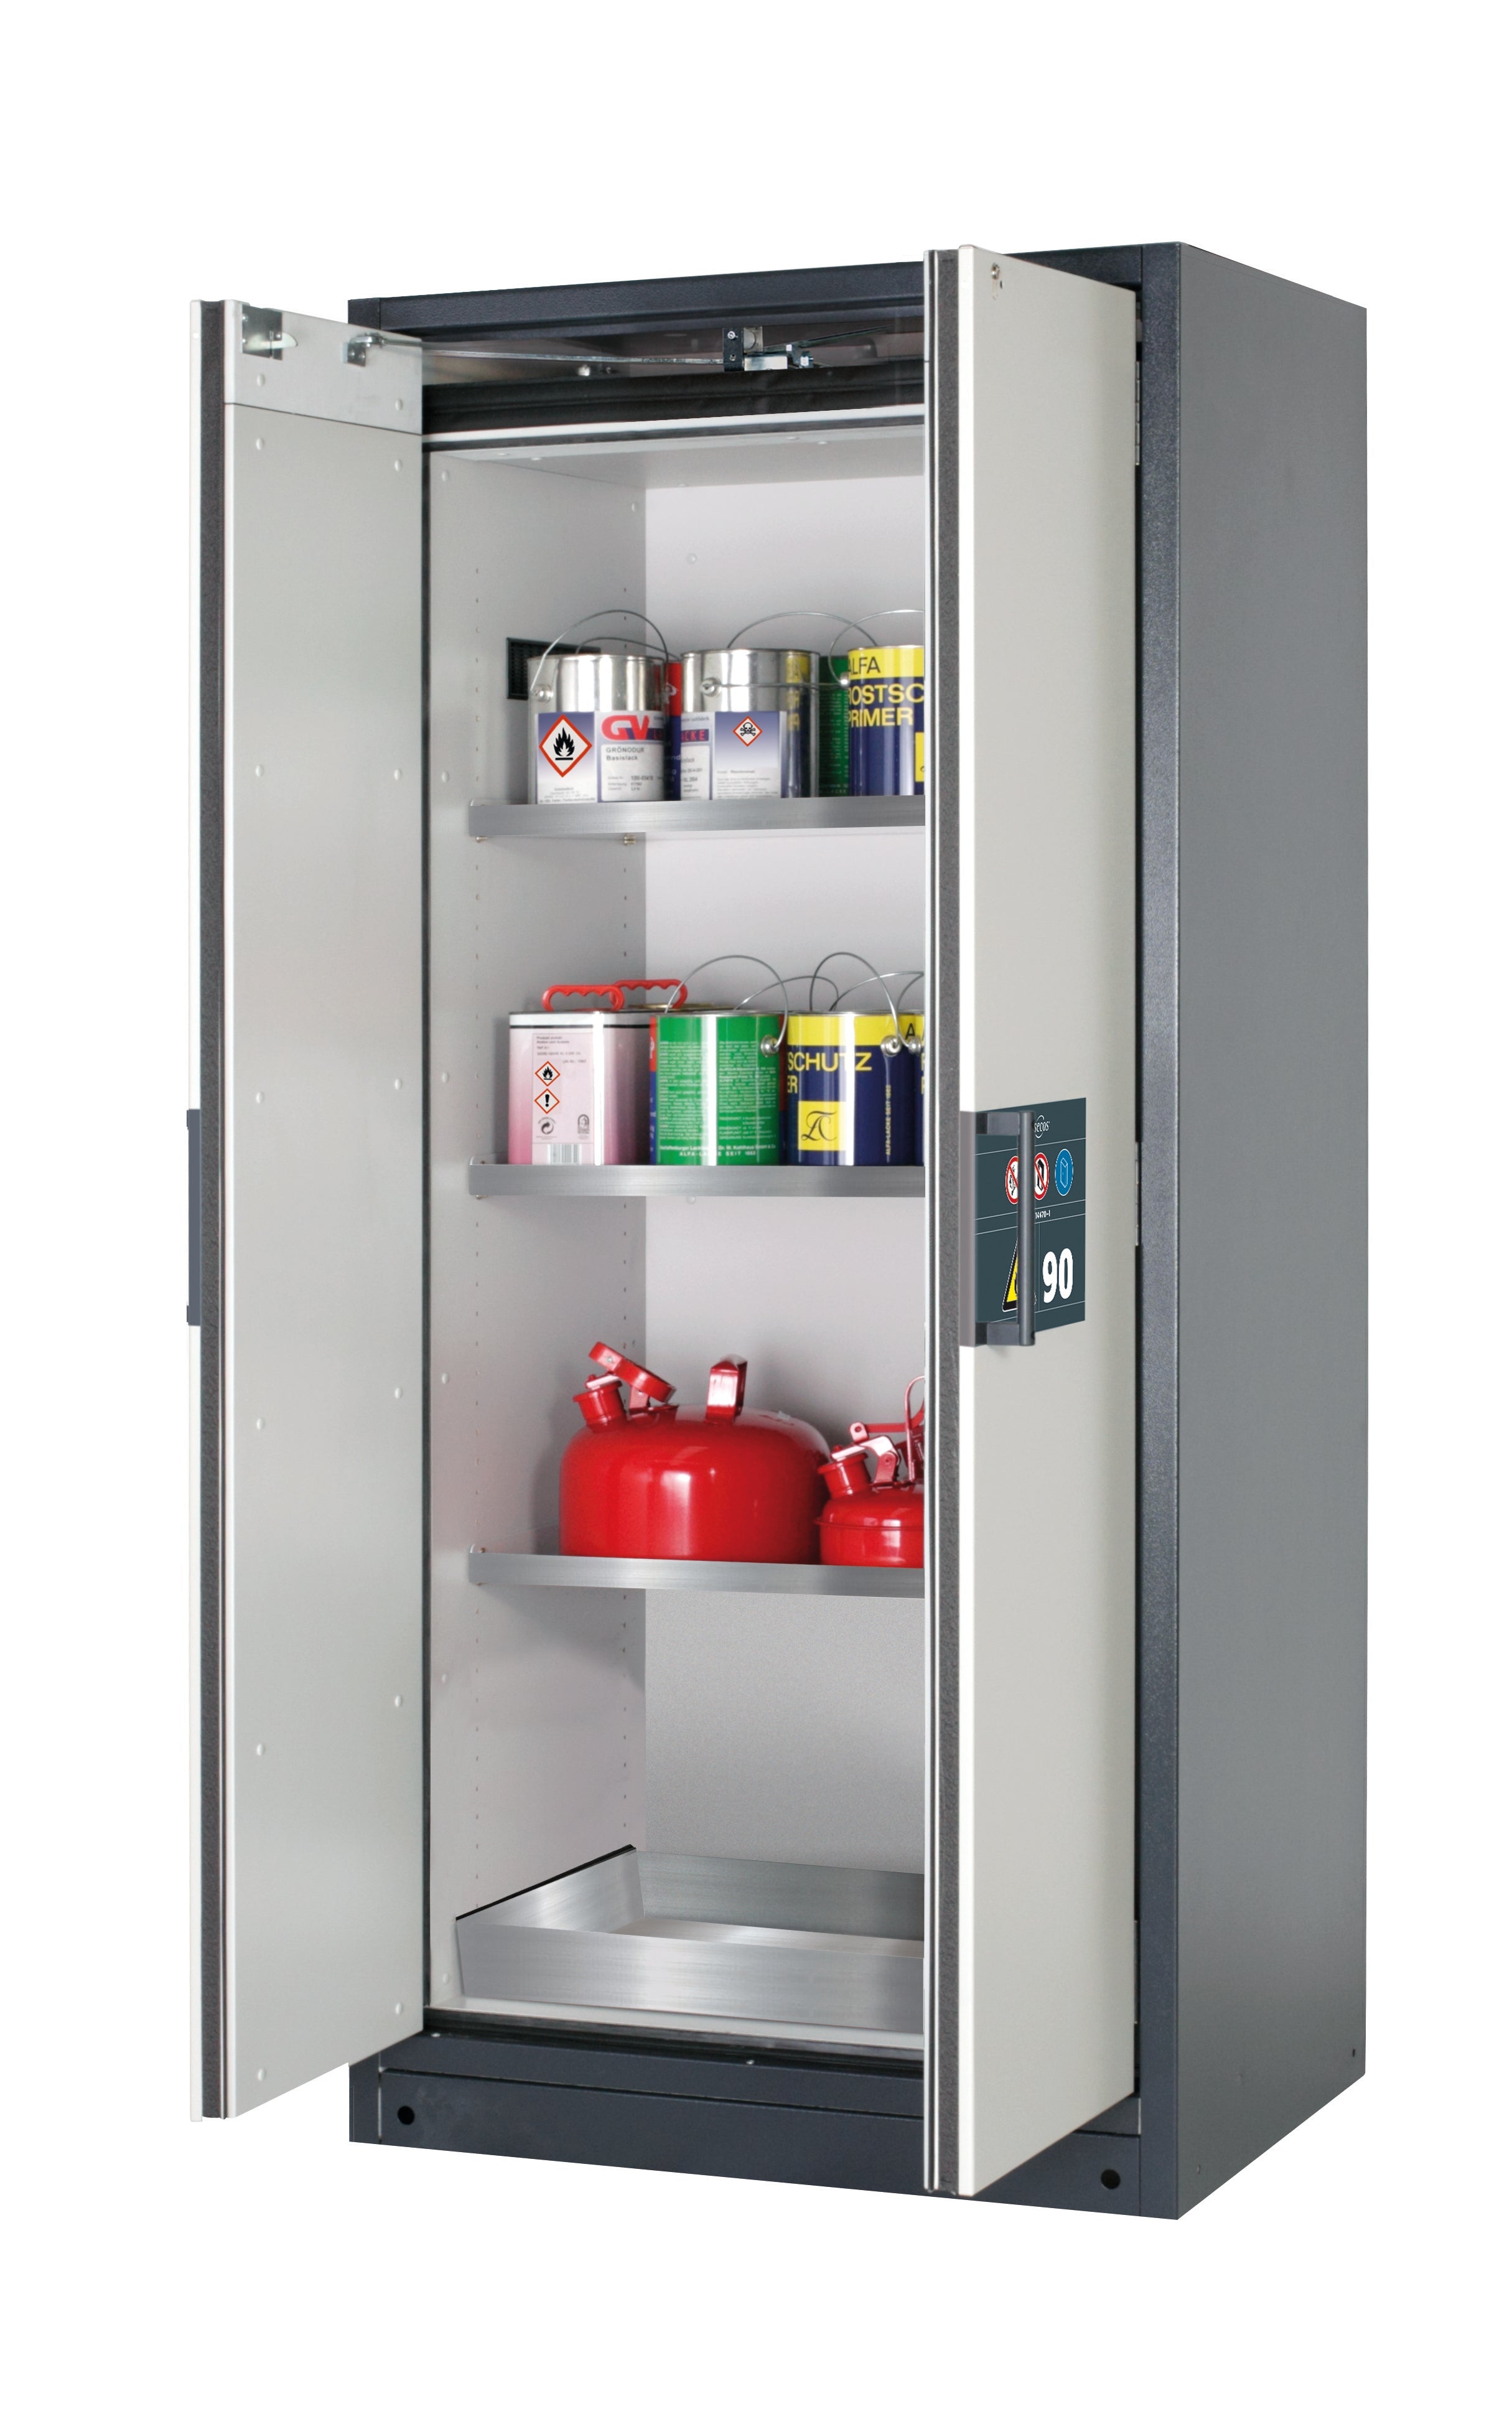 Type 90 safety storage cabinet Q-PEGASUS-90 model Q90.195.090.WDAC in light grey RAL 7035 with 3x shelf standard (stainless steel 1.4301),